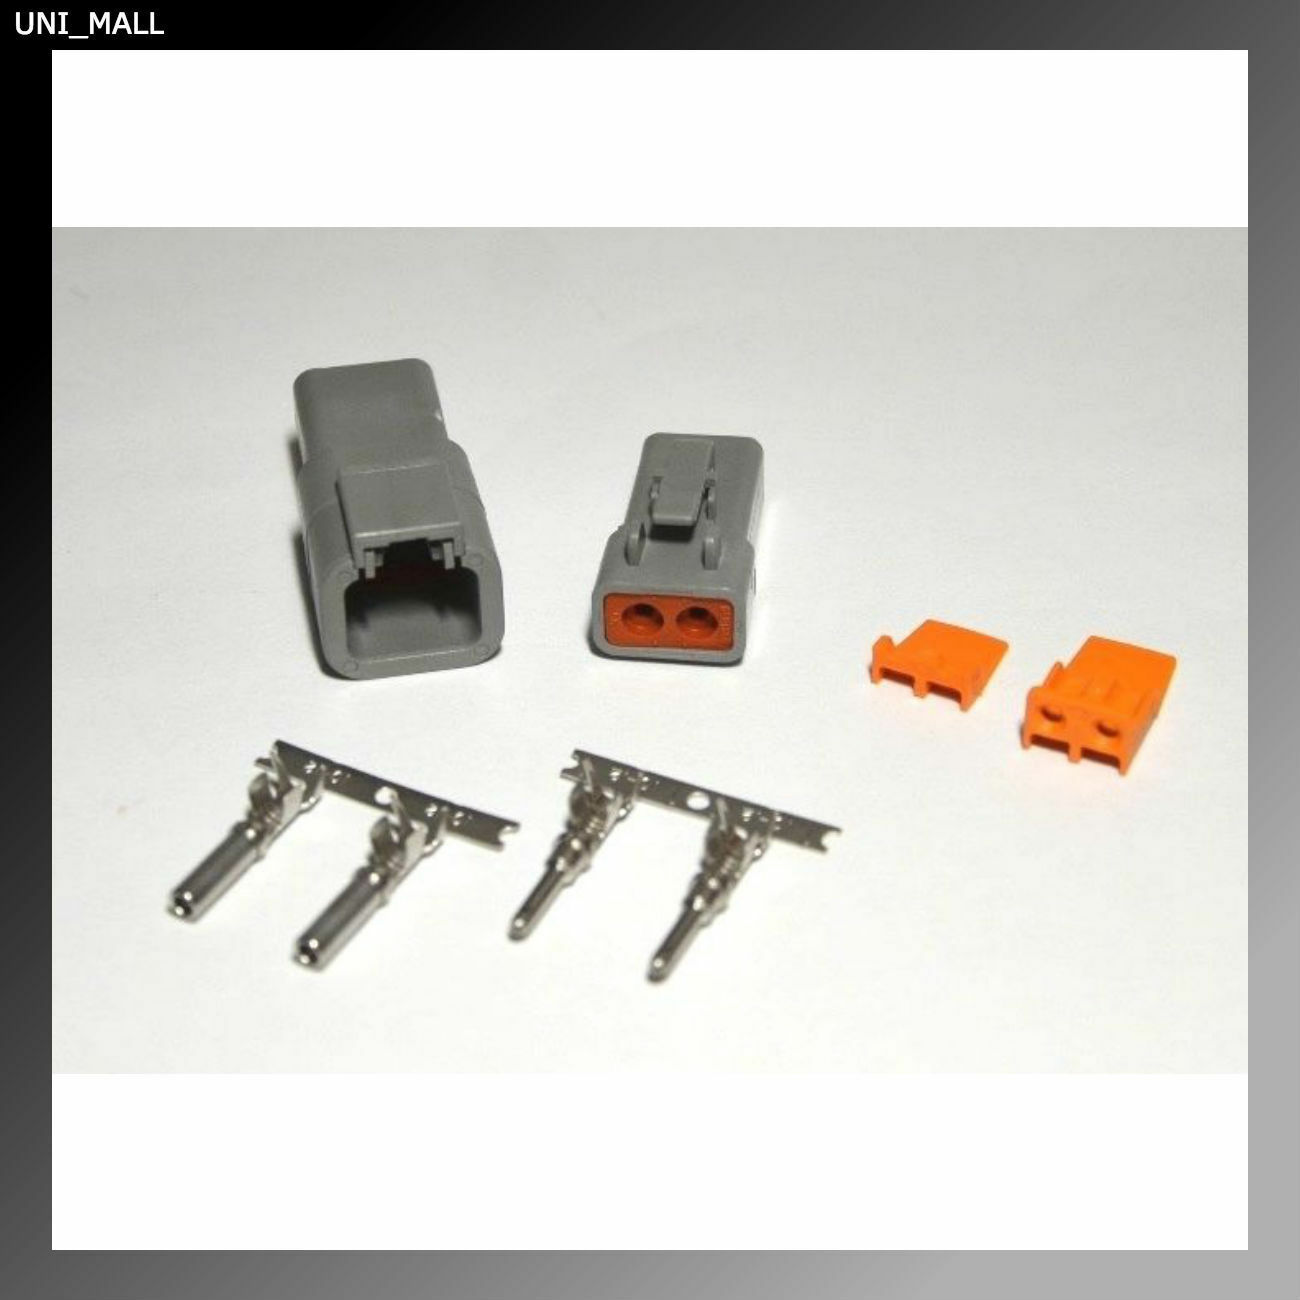 Deutsch Dtp 2-pin Genuine Connector Kit 10-12awg Stamped Contacts, Usa